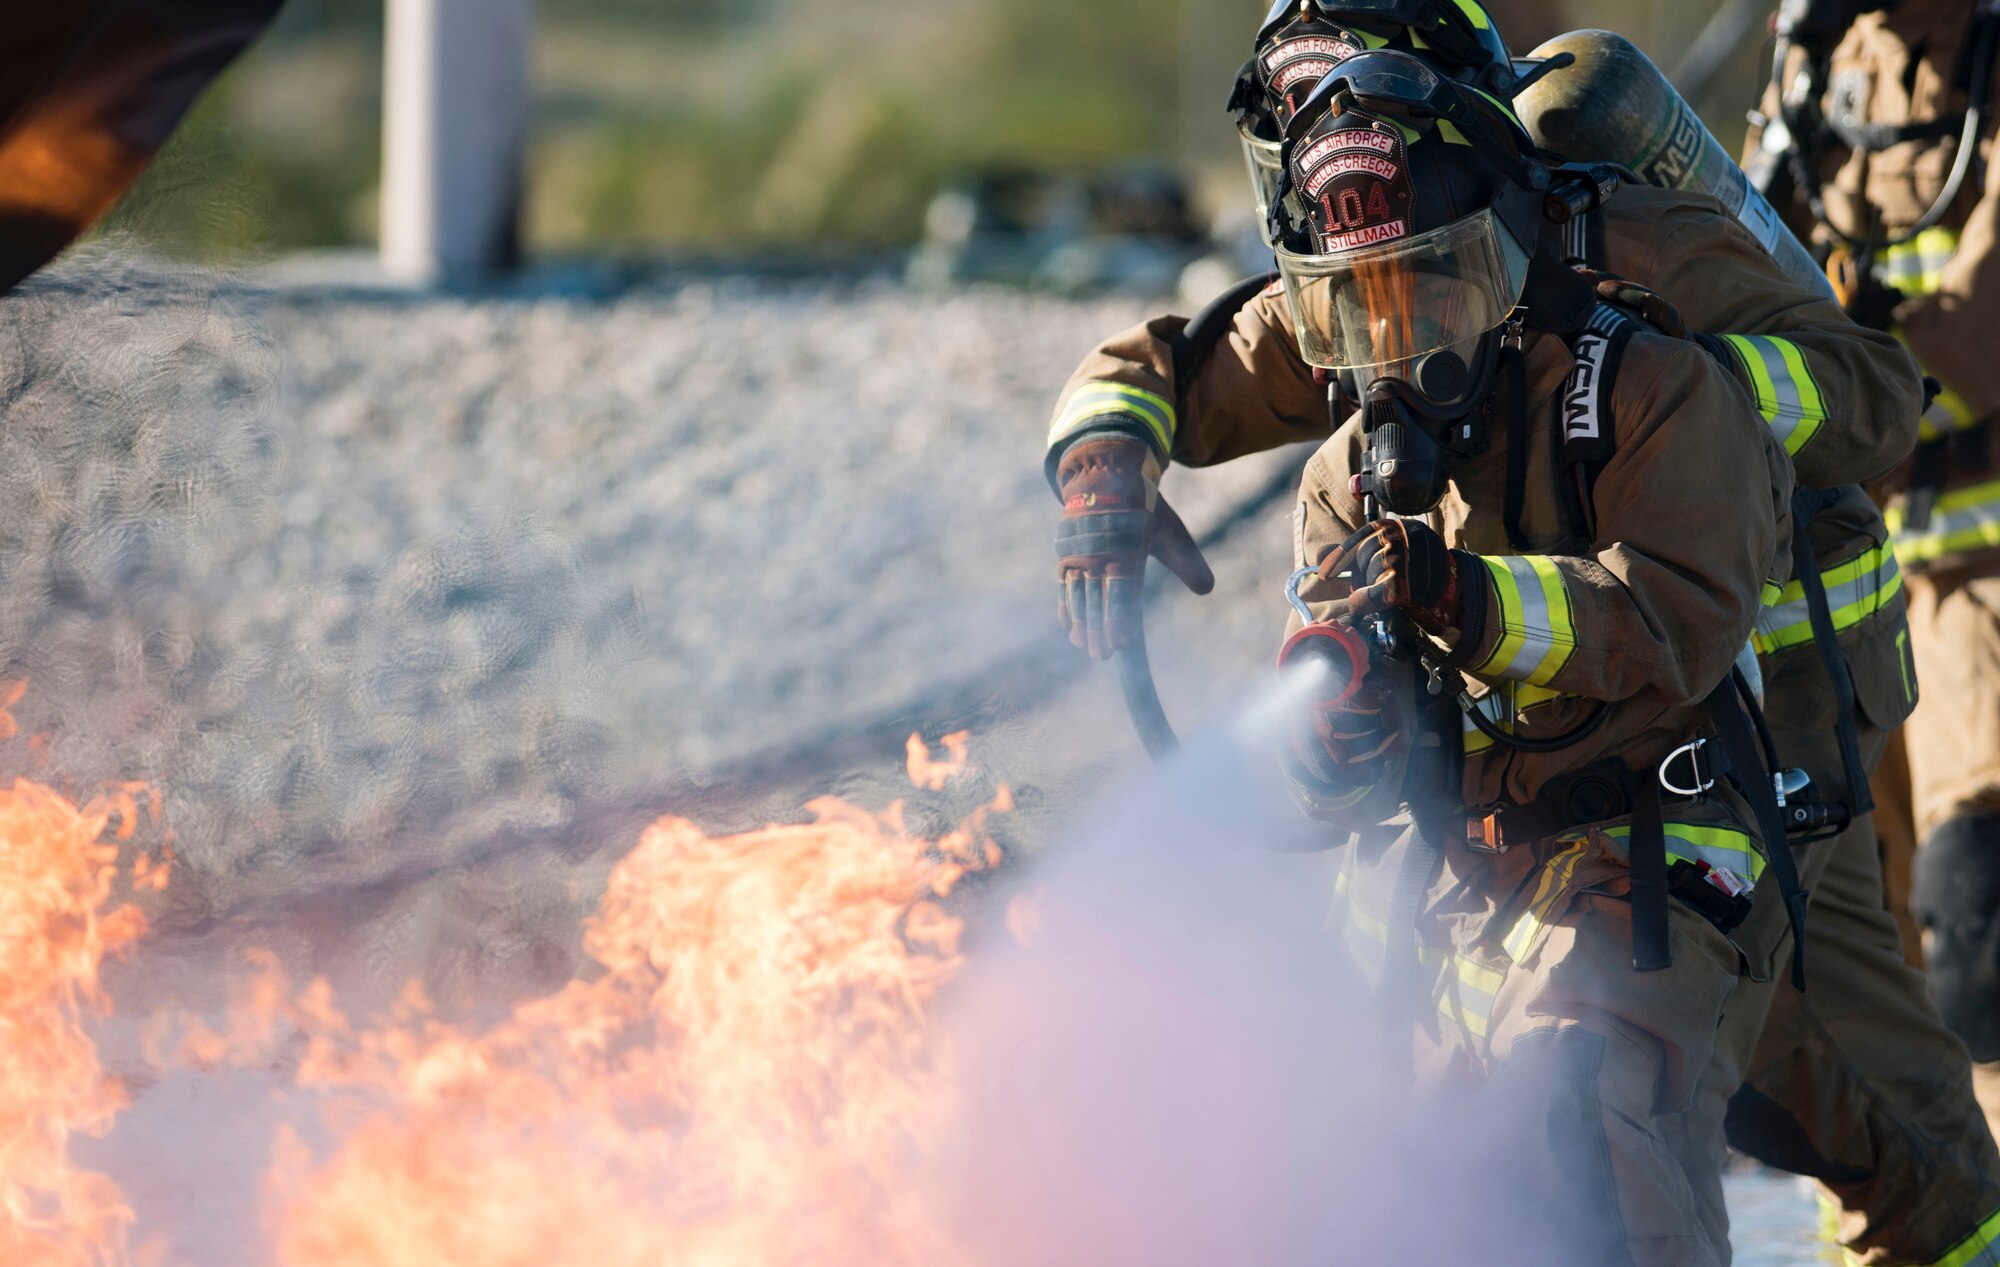 Airman 1st Class Christopher Stillman, 99th Civil Engineer Squadron firefighter, uses a hose to put out a fire during a training exercise Oct. 23, 2018, at Nellis Air Force Base, Nevada. The training exercise simulated a crashed plane and gave the firefighters an opportunity to practice fighting aircraft fires. (U.S. Air Force photo by Airman 1st Class Andrew D. Sarver)